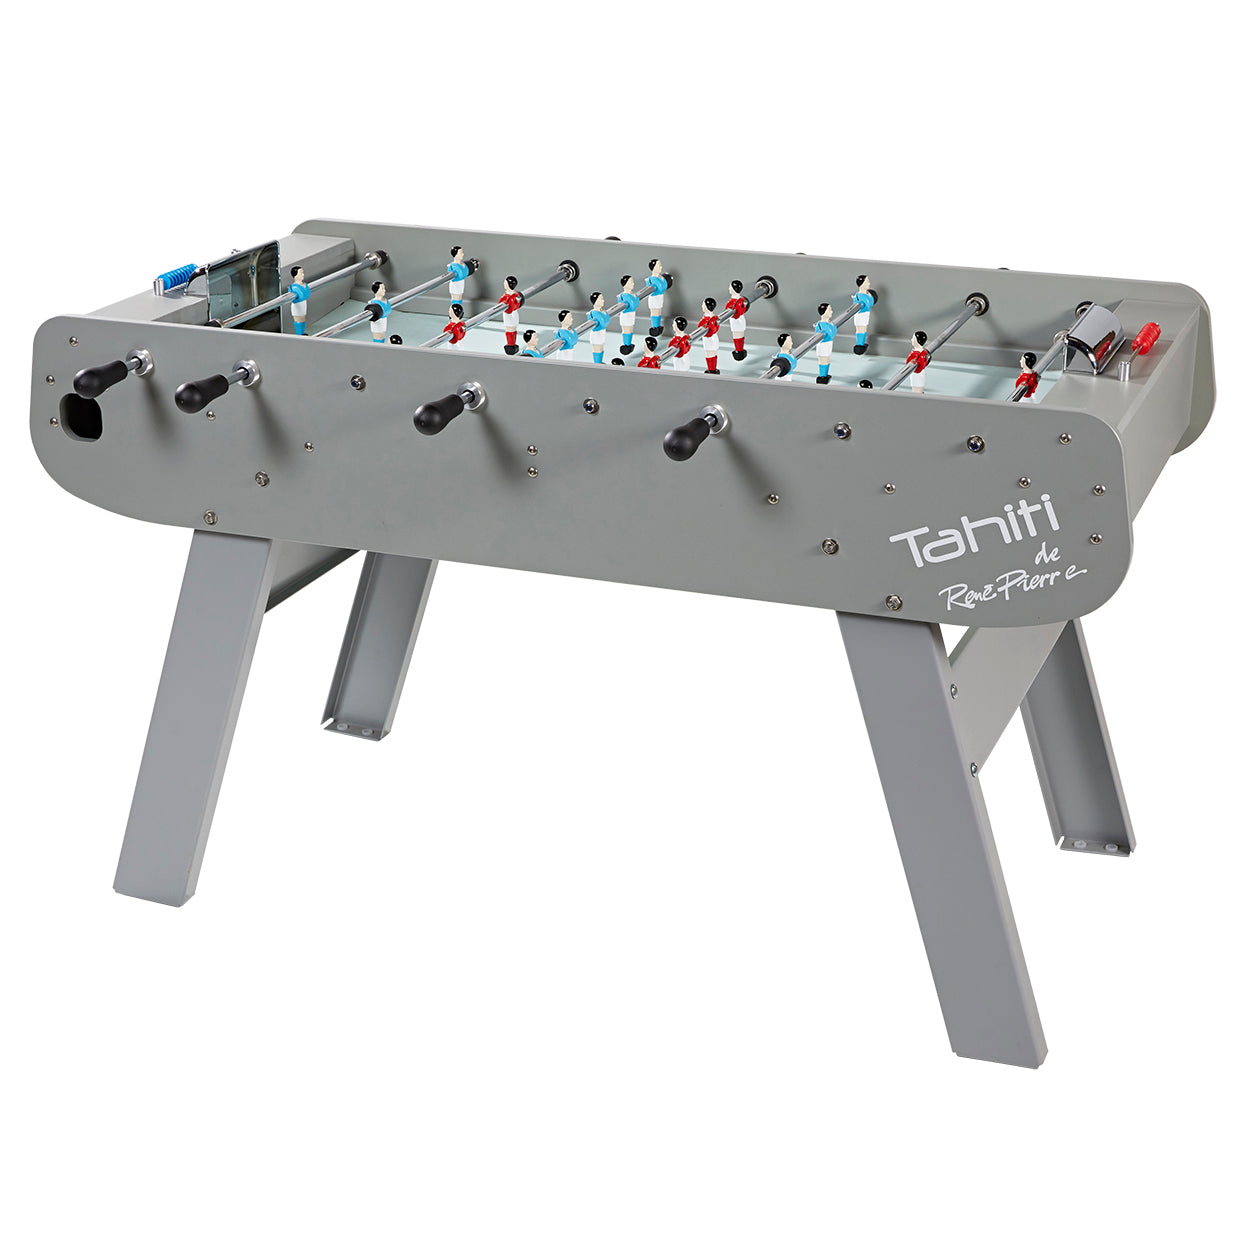 4 player made in france foosball table